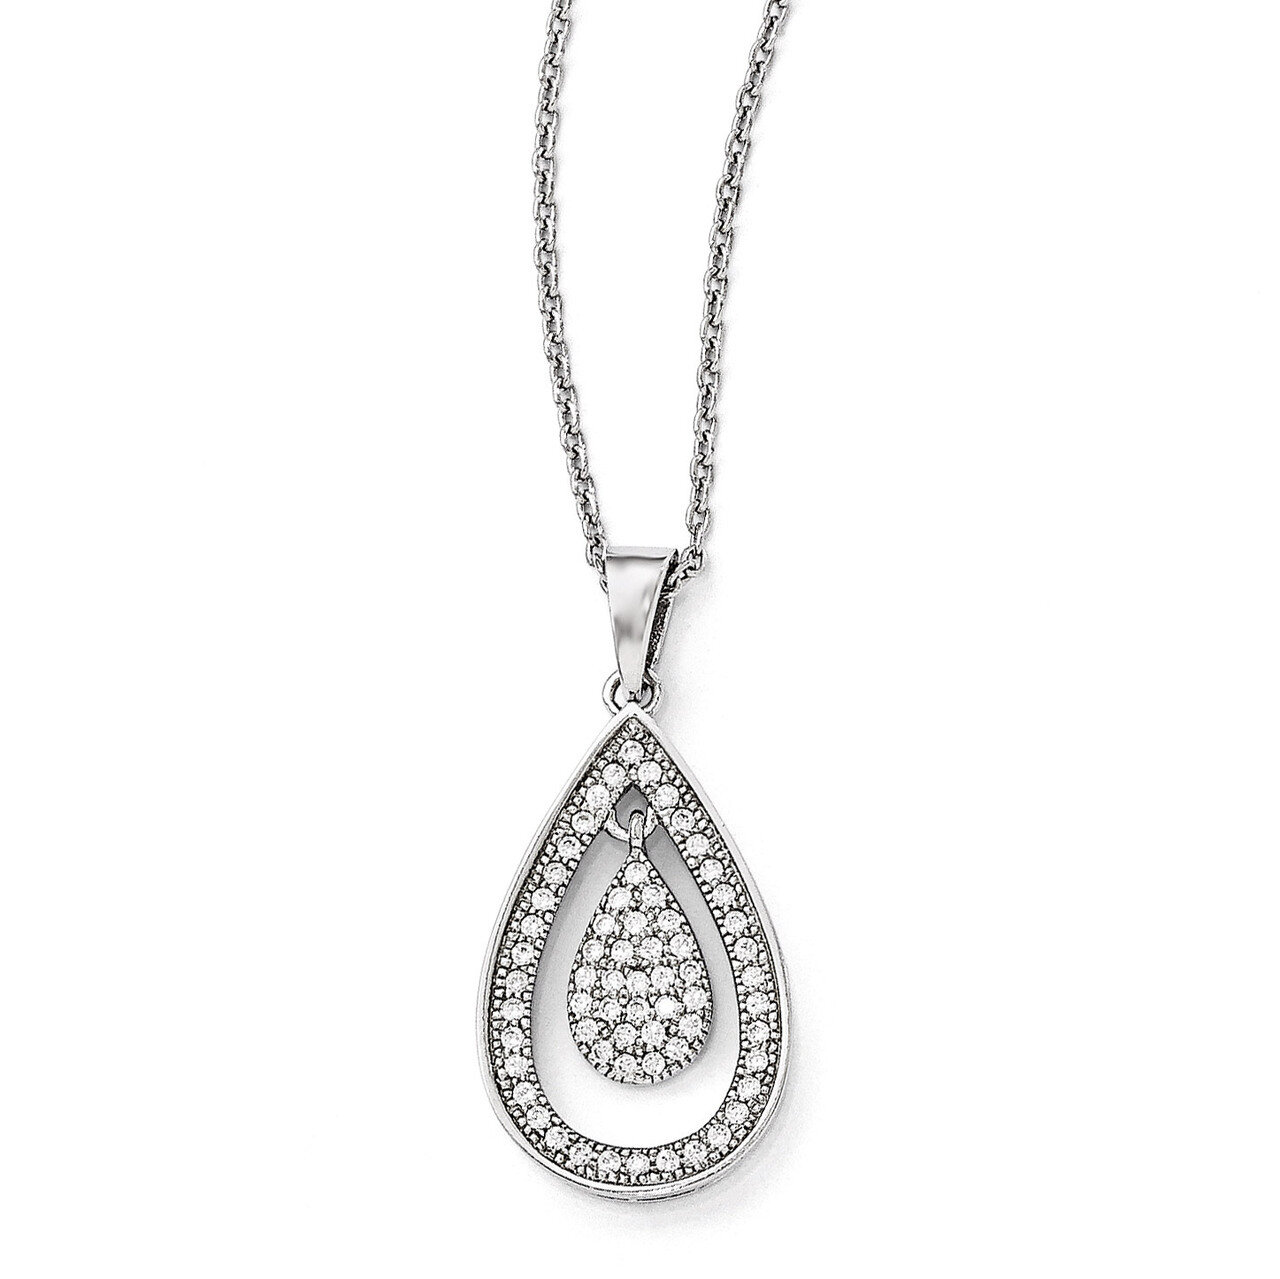 Teardrop Necklace Sterling Silver & Cubic Zirconia Polished QMP219-18